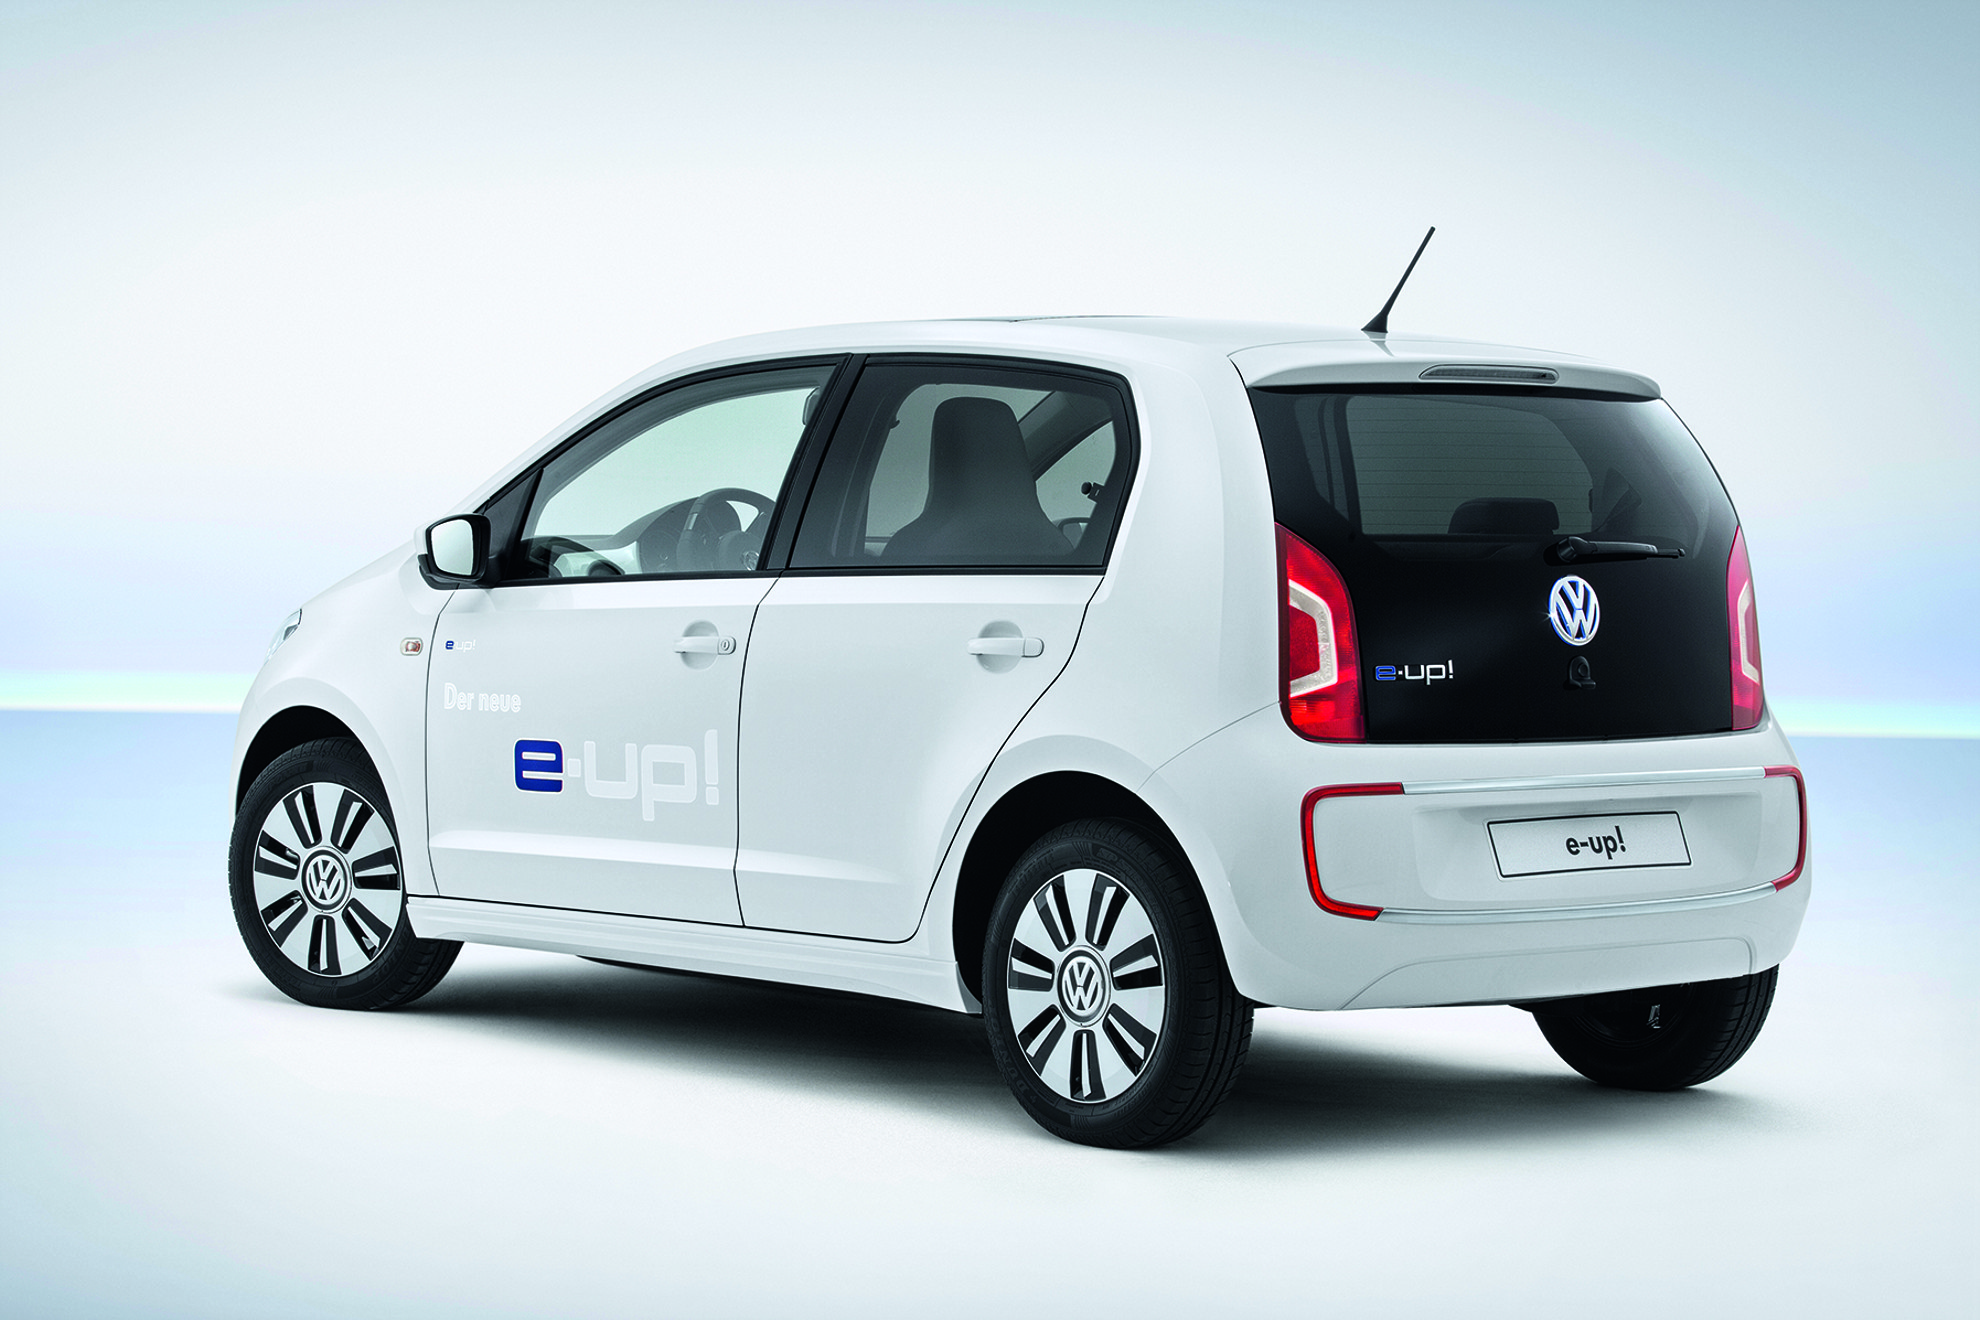 Volkswagen Electric Vehicle e-up!